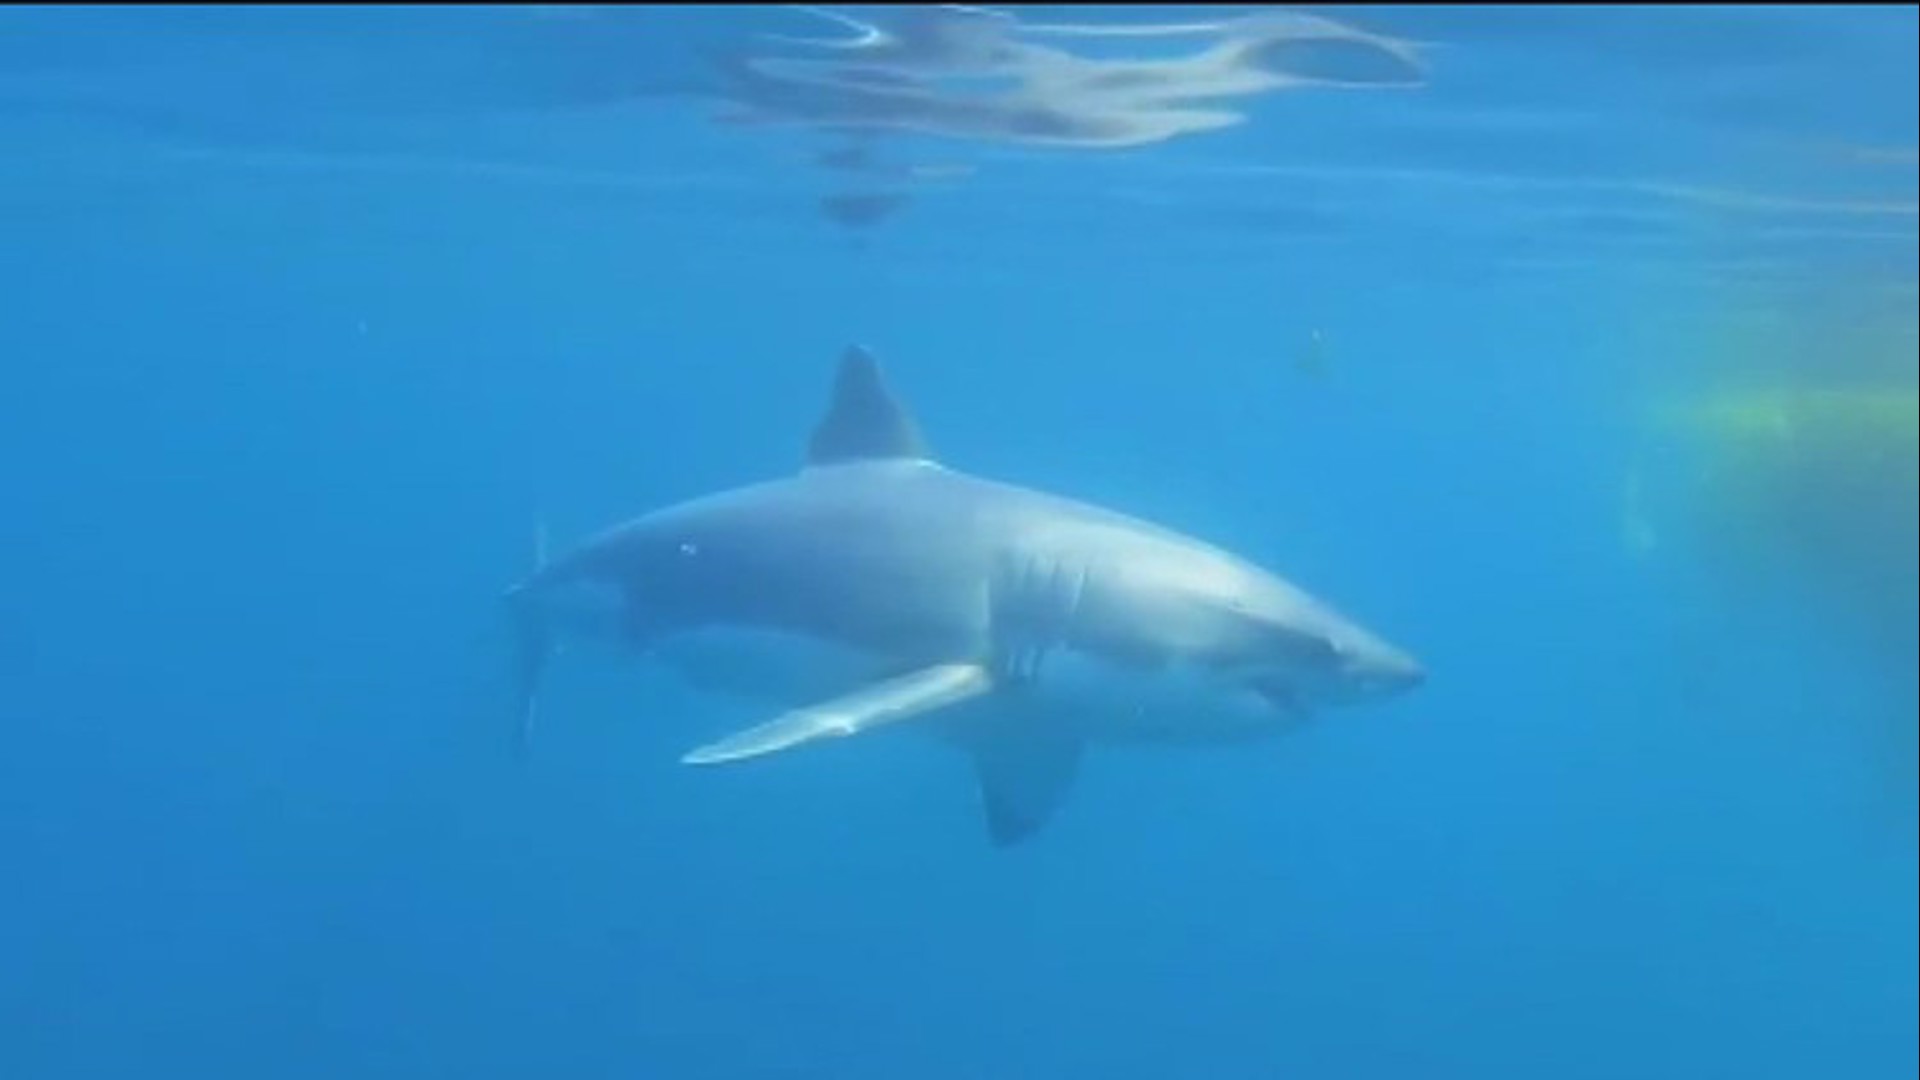 Director of the Cal State University Long Beach Shark Lab, Chris Lowe sat down and talked about the research they have been conducting in Southern California